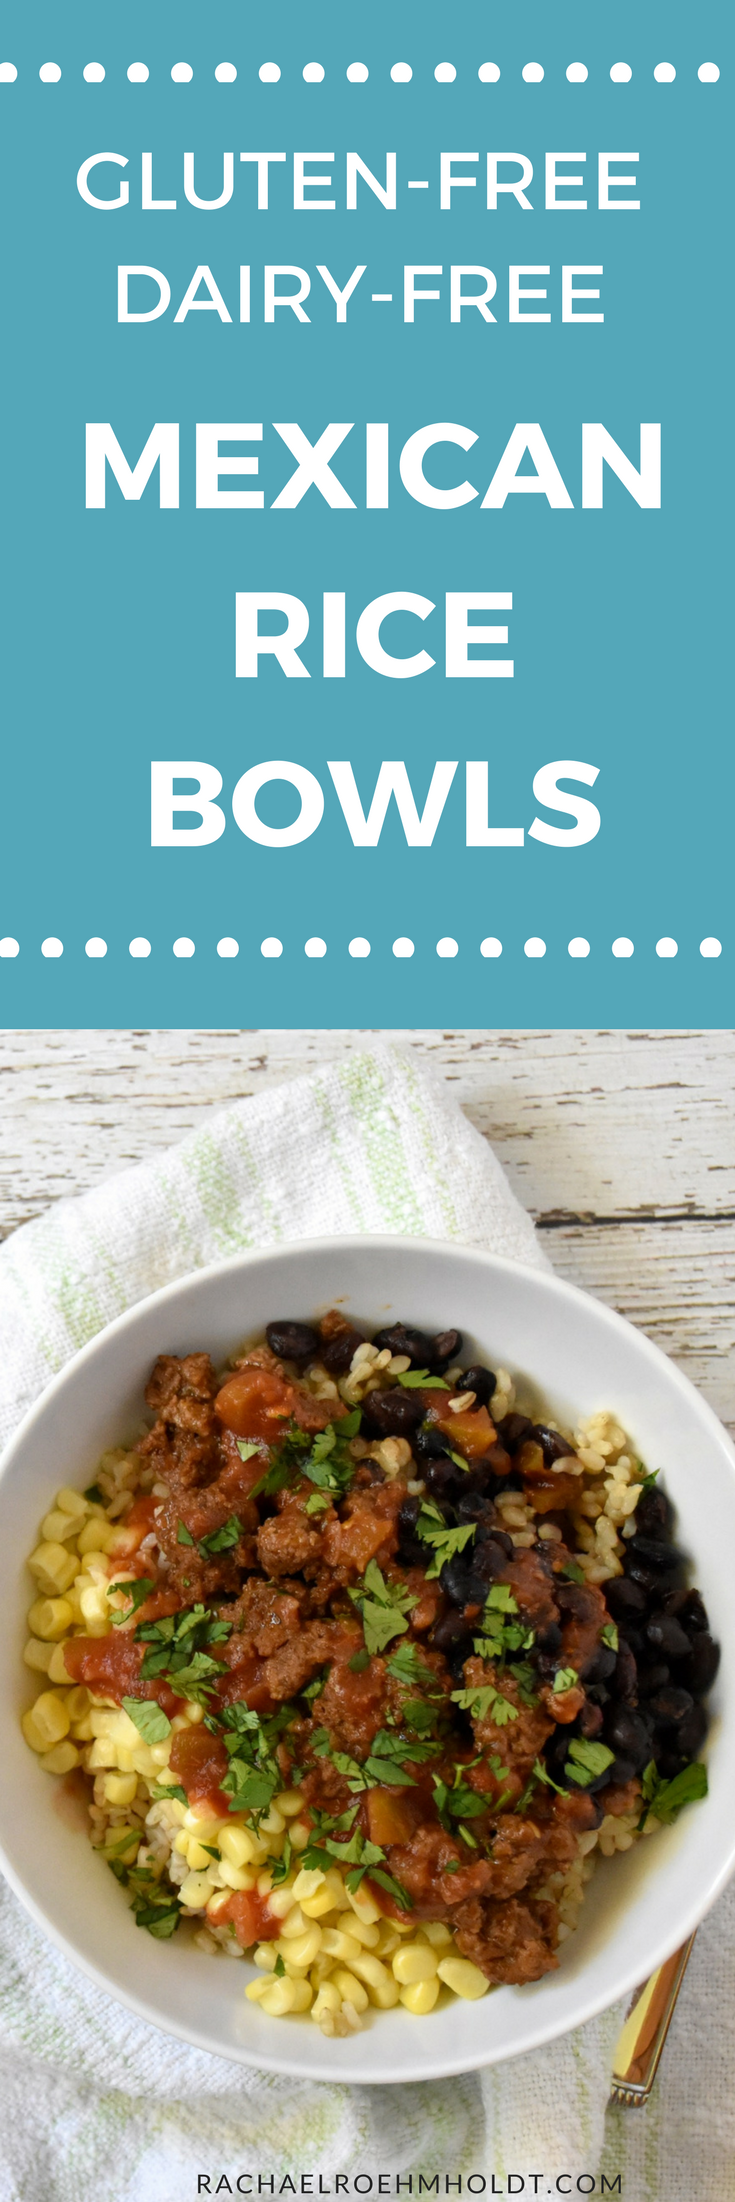 Gluten-free Dairy-free Mexican Rice Bowls